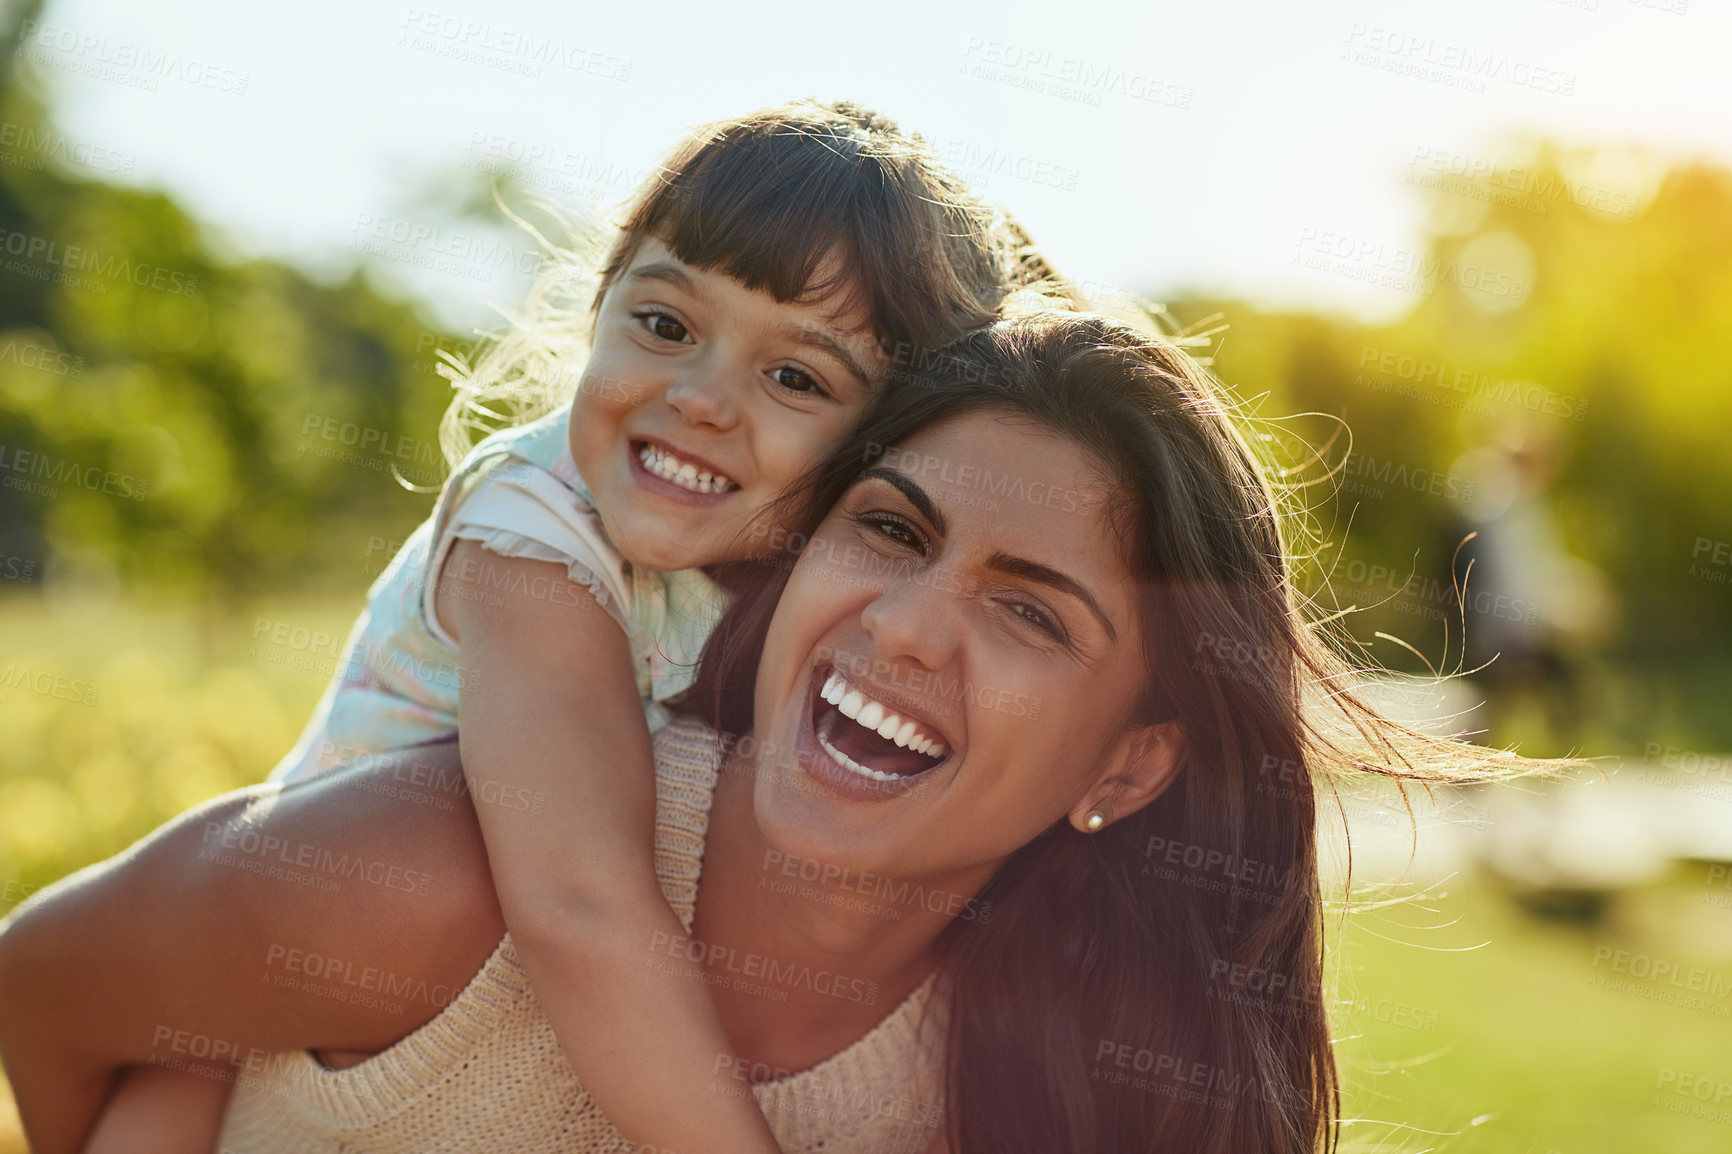 Buy stock photo Shot of an adorable little girl and her mother enjoying a piggyback ride in the park